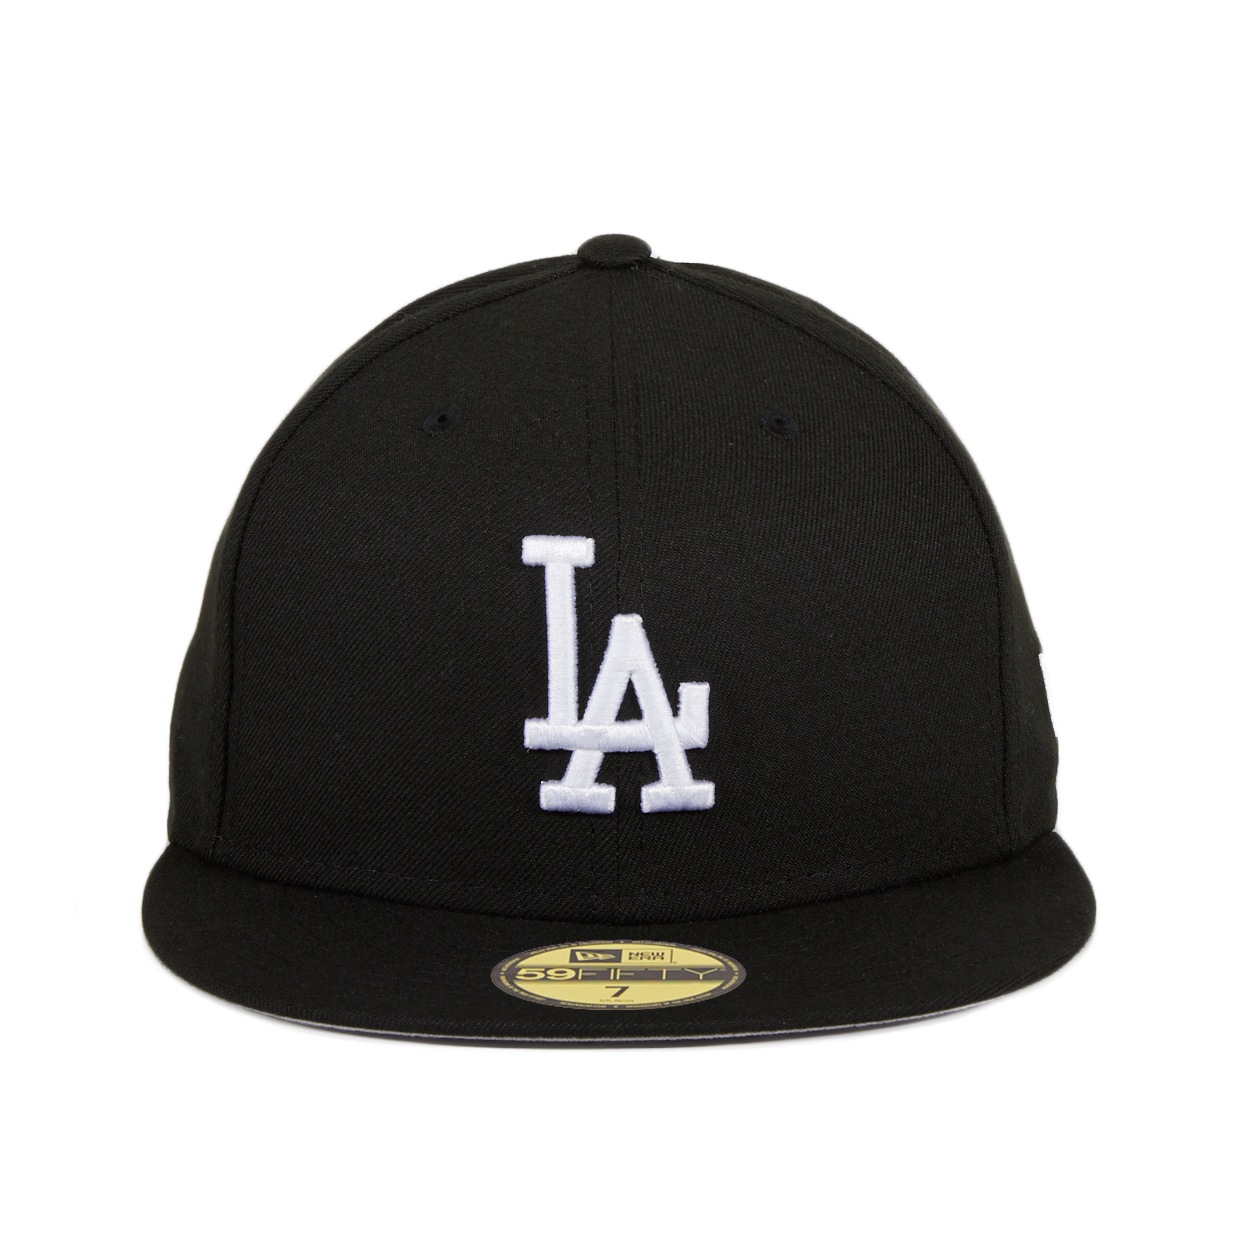 New Era Los Angeles Dodgers MLB Basic 59FIFTY Fitted 7 3/8 / Red/White